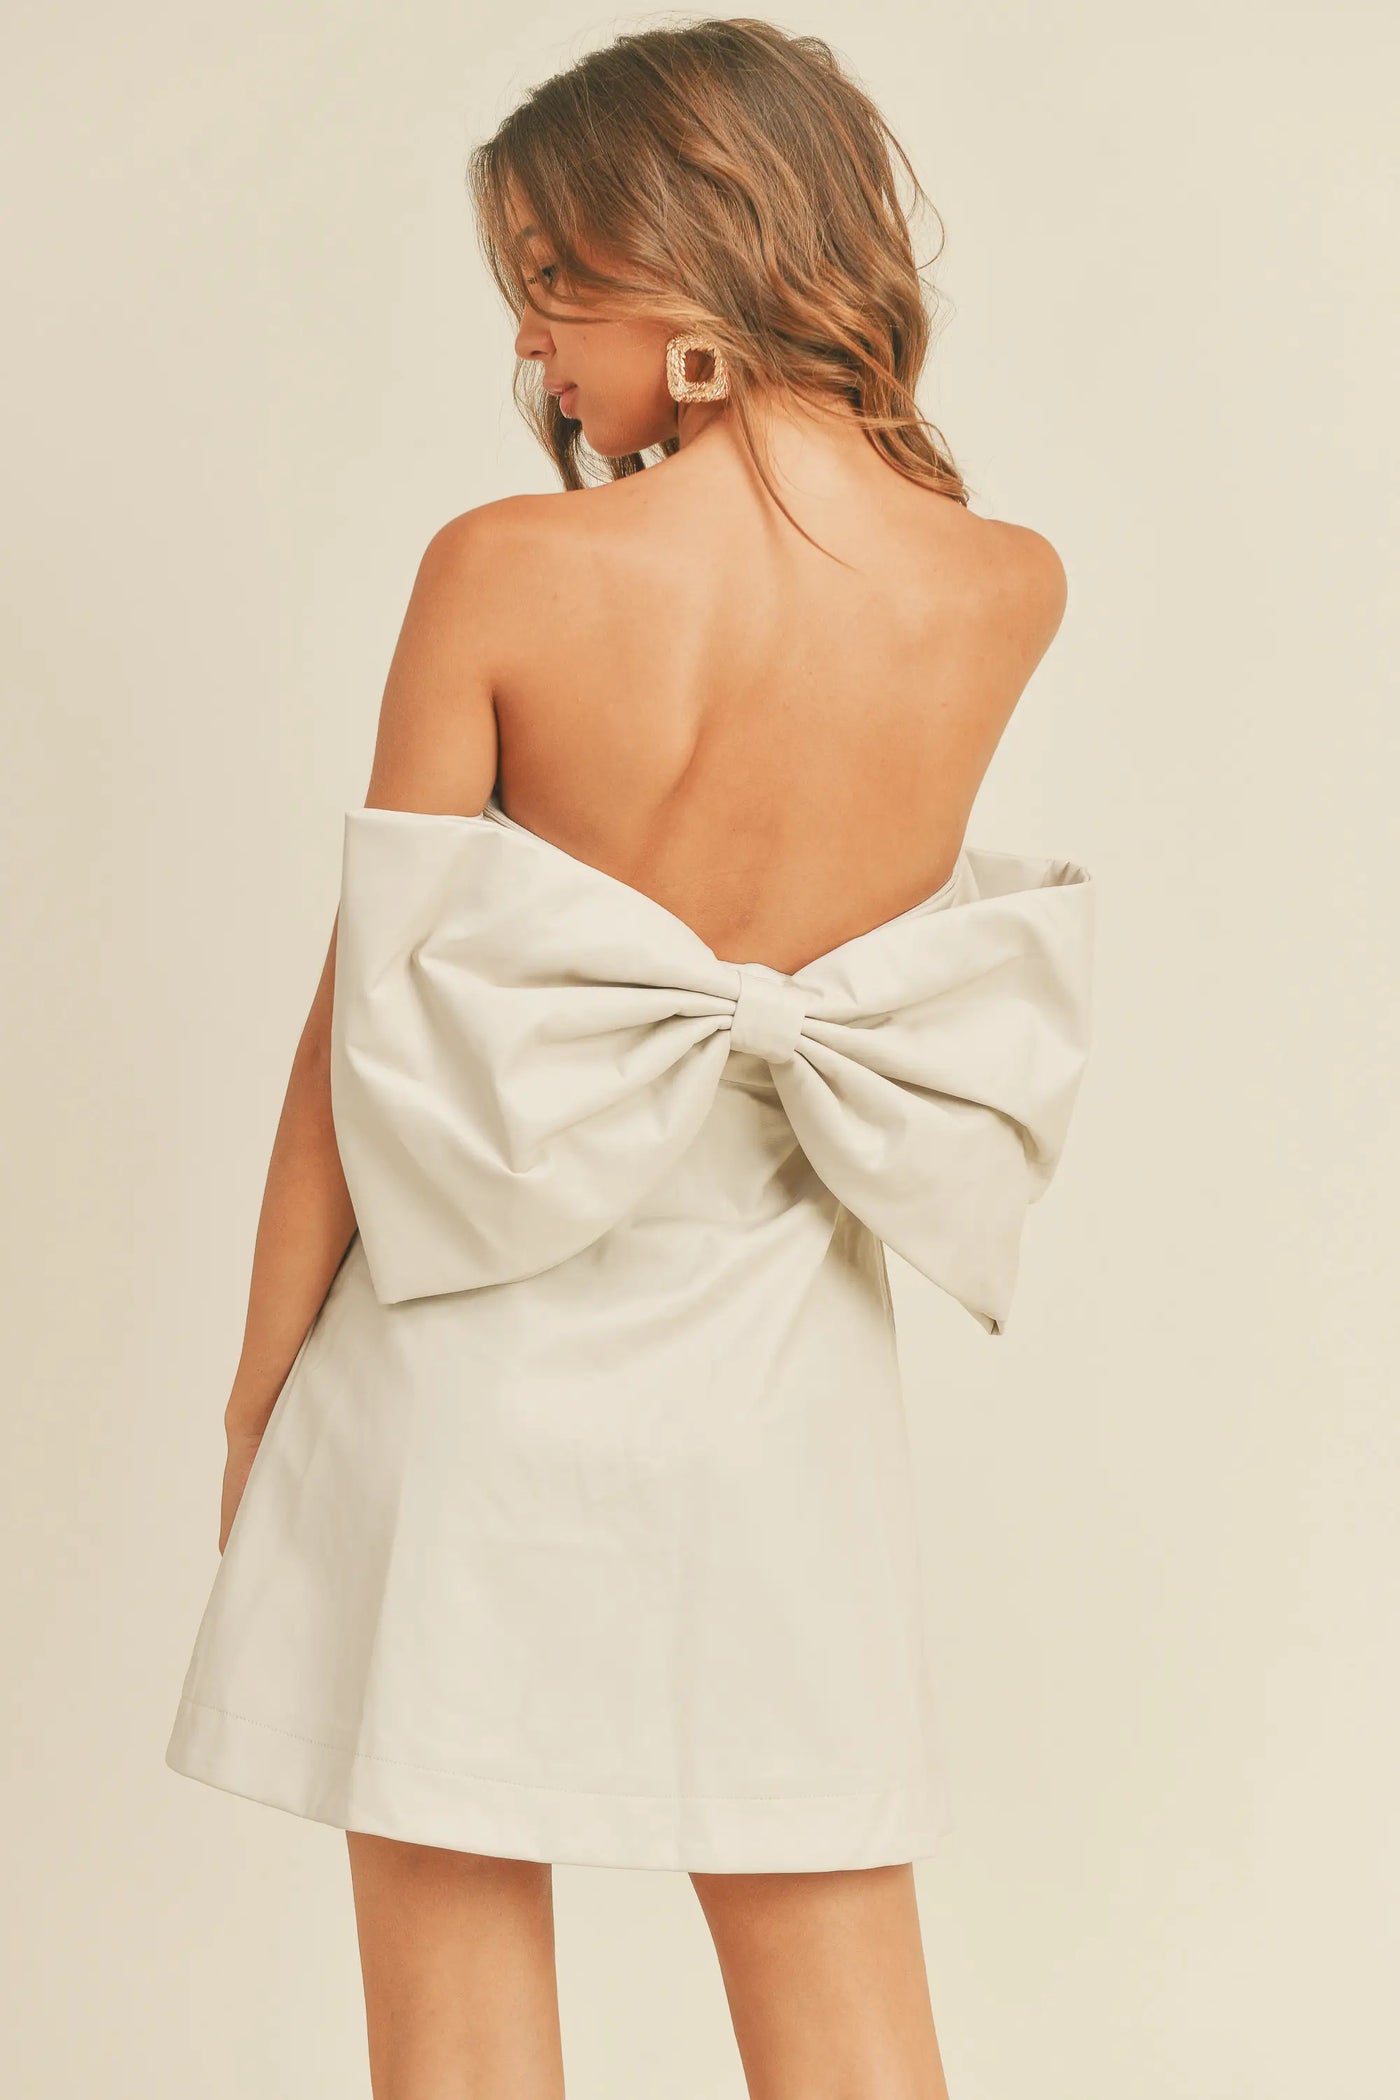 pleather-white-ivory-cream-dress-with-bow-on-back